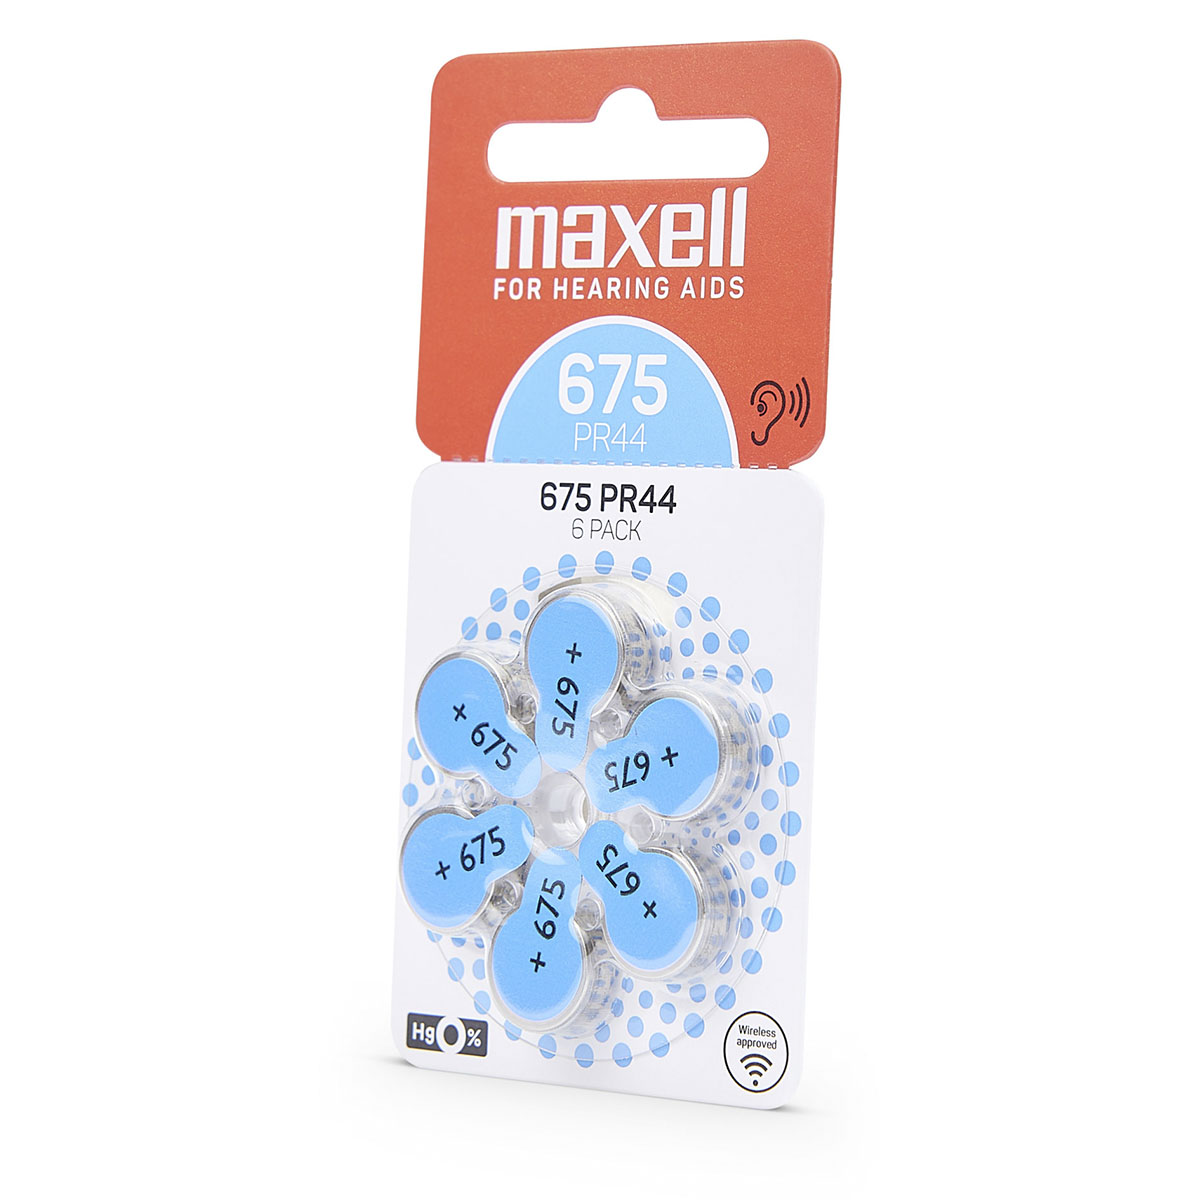 Maxell 6 piles auditives No. 675, plaquette